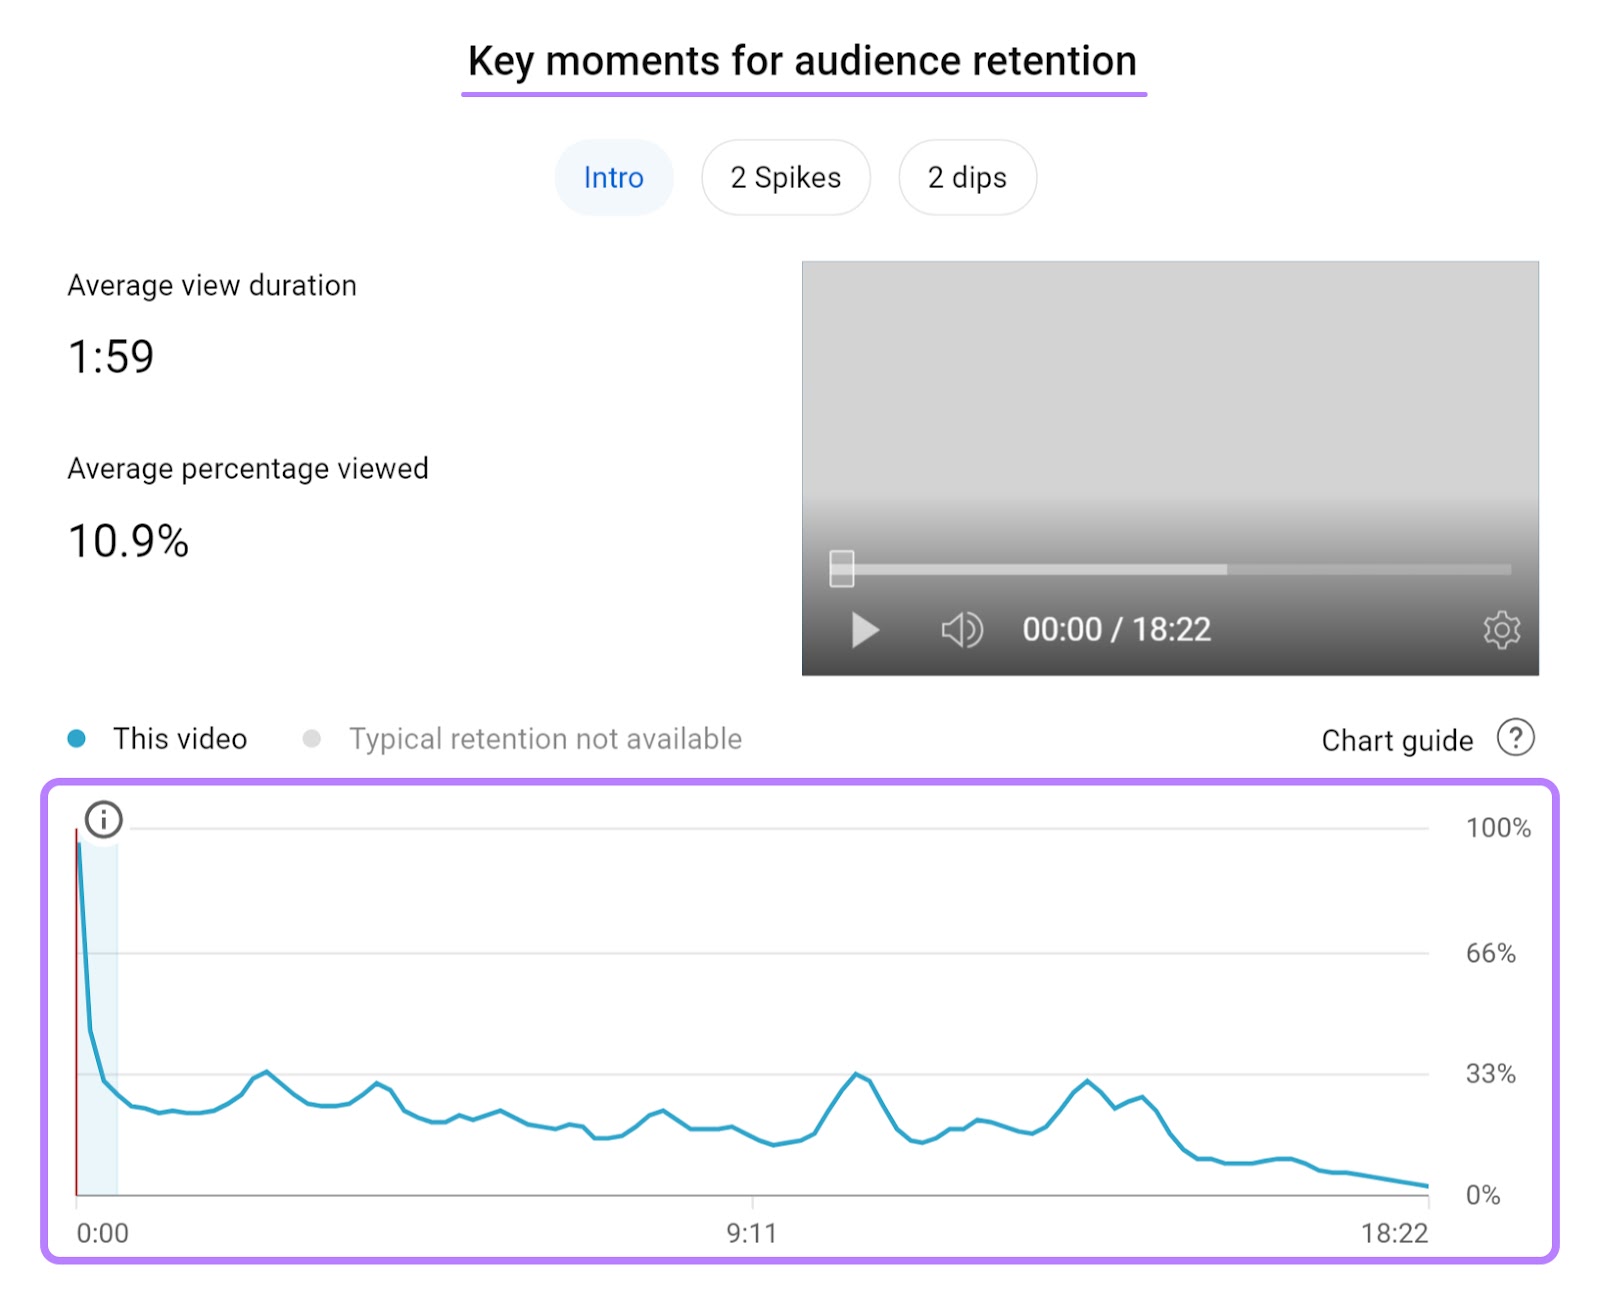 Audience retention graph shown under “Key moments for audience retention" section